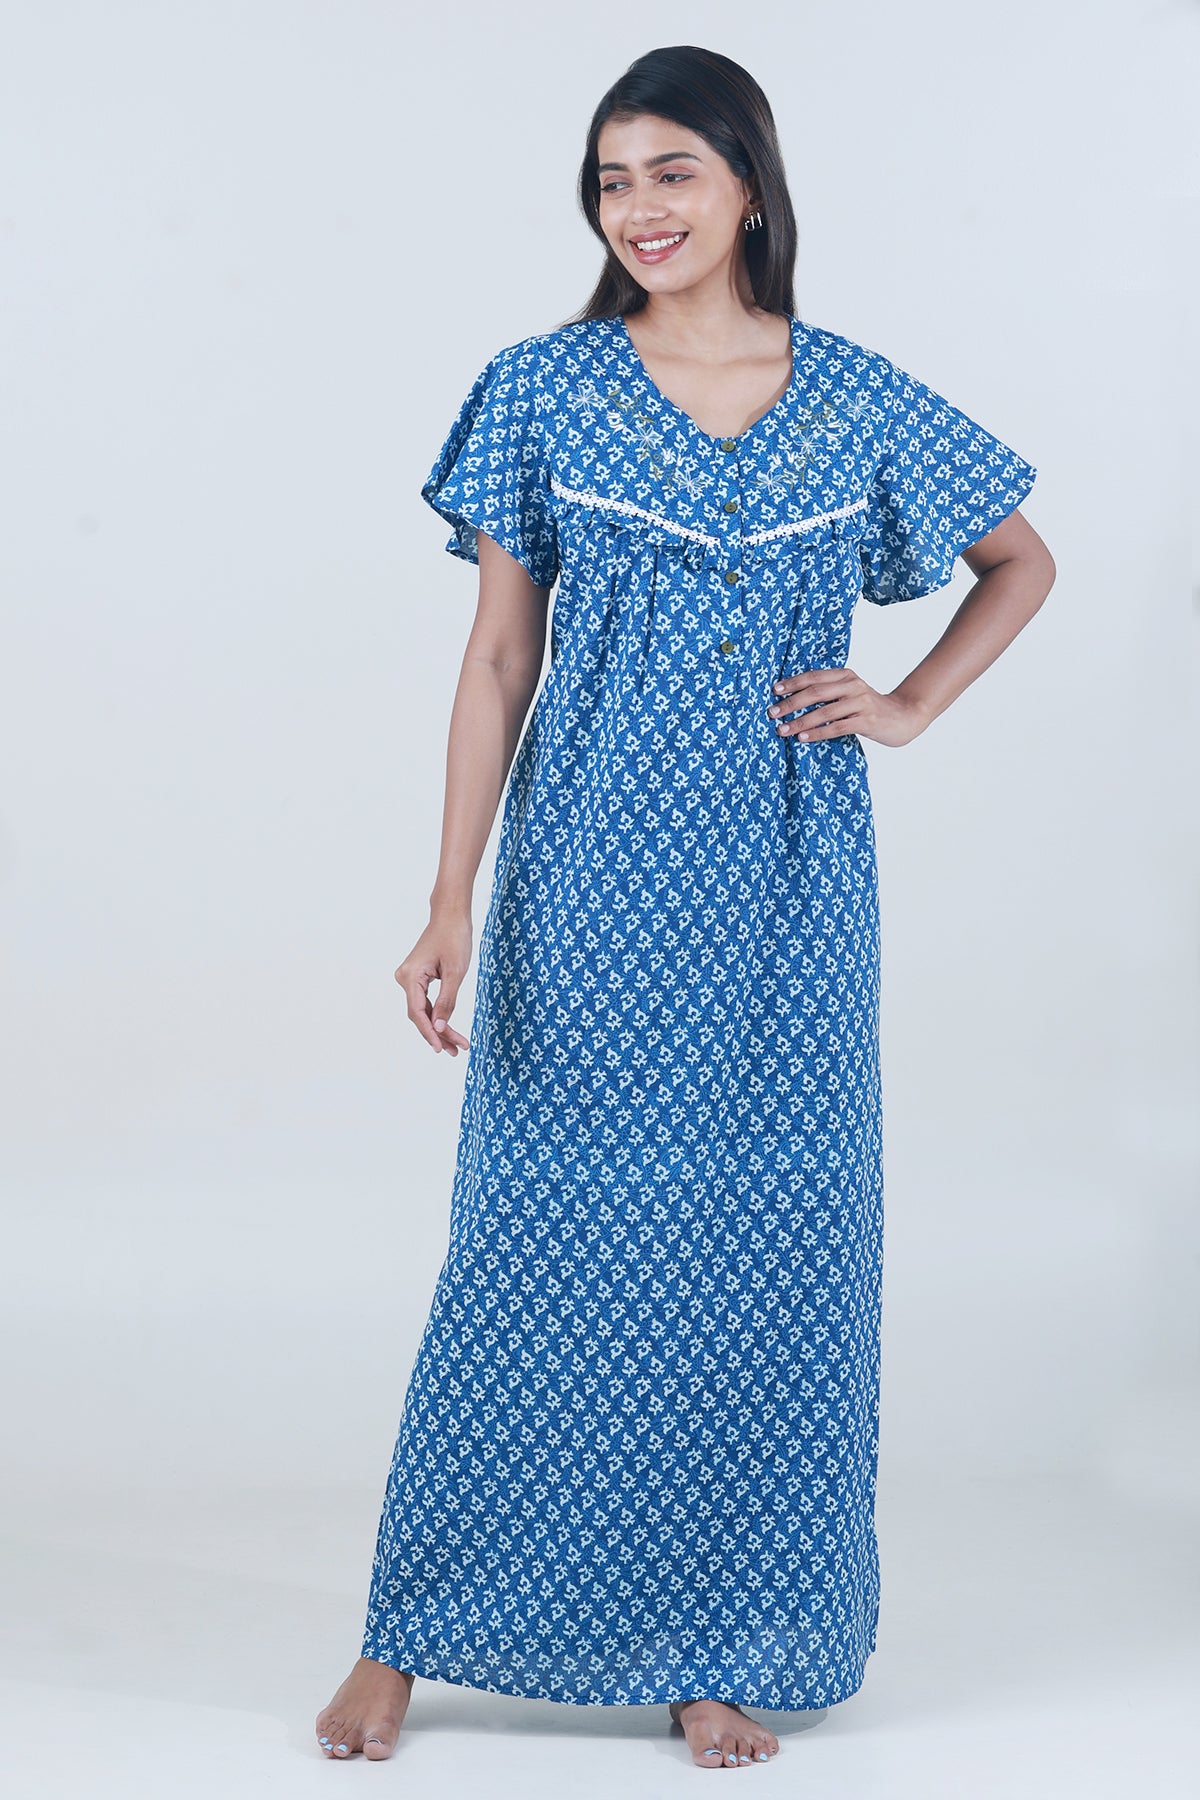 Monochromatic Printed Nighty With Embroidered & lace Embellished Yoke - Blue